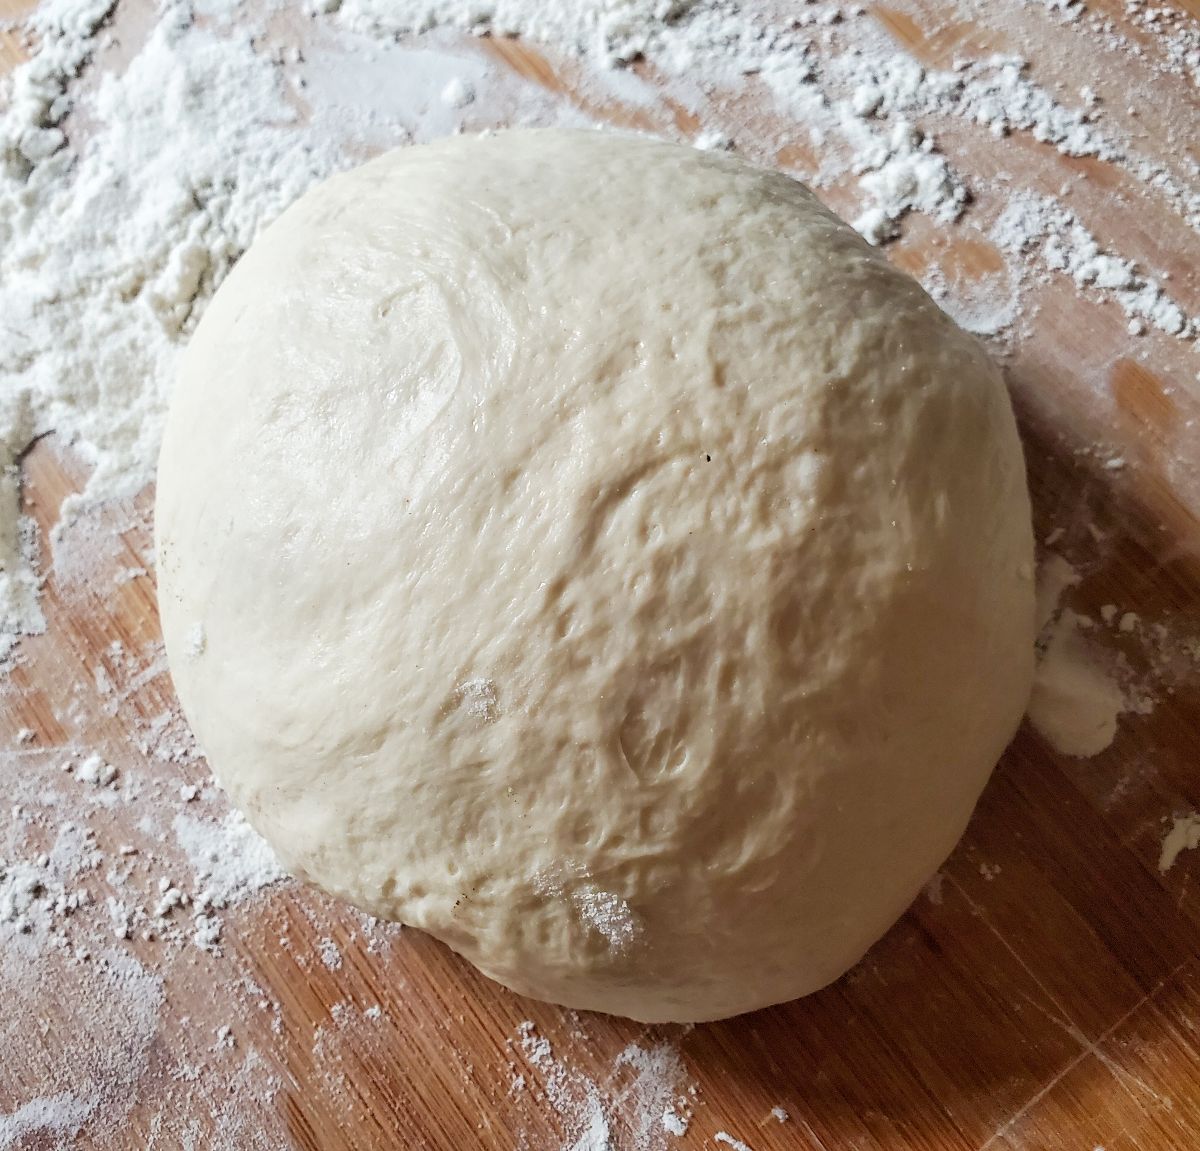 Easy Pizza Dough Recipe to Make at Home